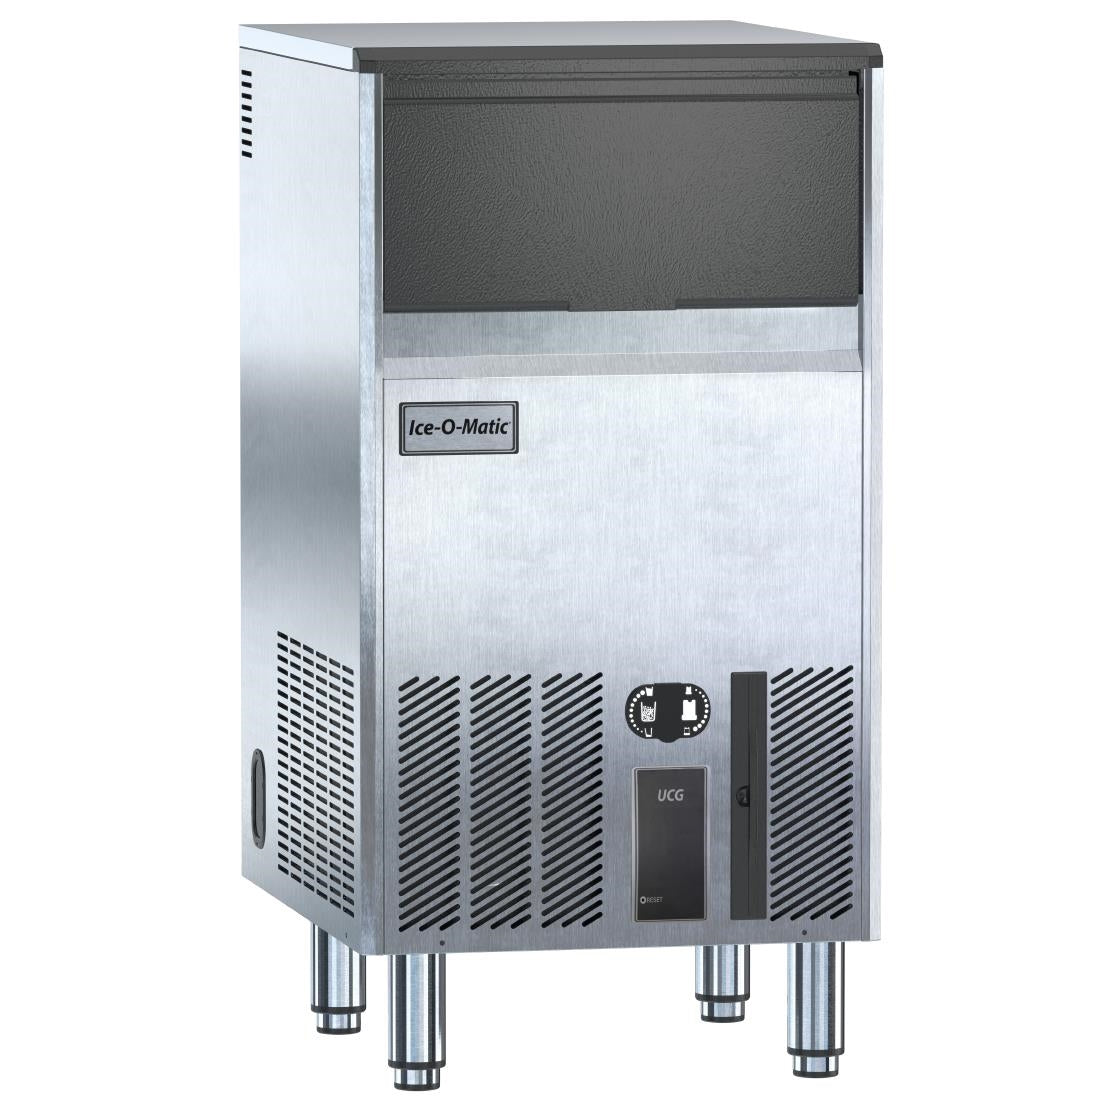 Ice-O-Matic Bistro Cube Ice Machine UCG105A FT643 JD Catering Equipment Solutions Ltd